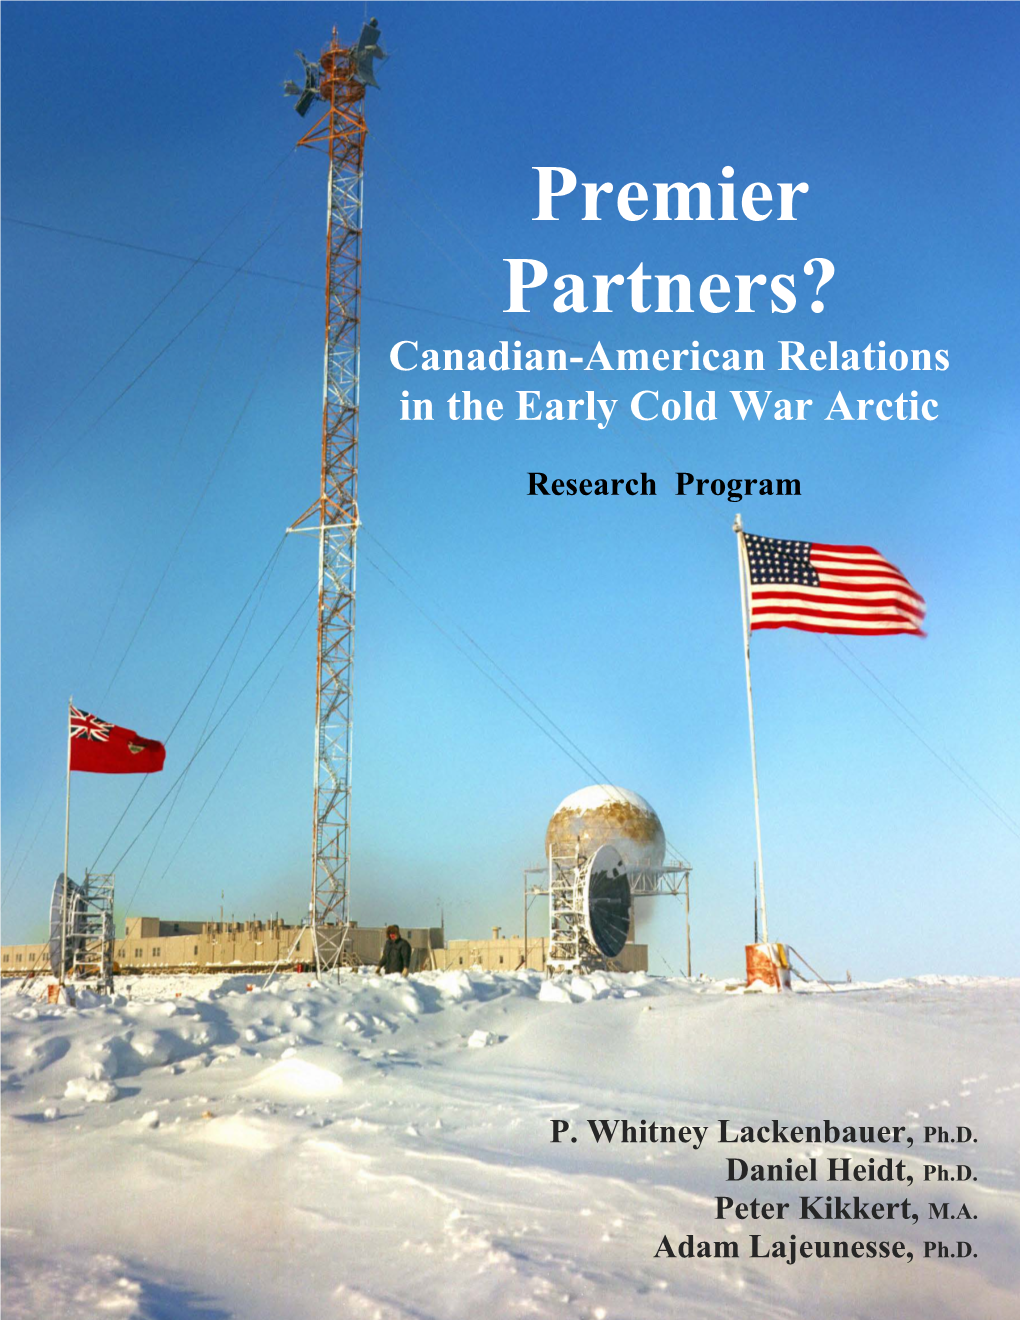 Premier Partners? Canadian-American Relations in the Early Cold War Arctic